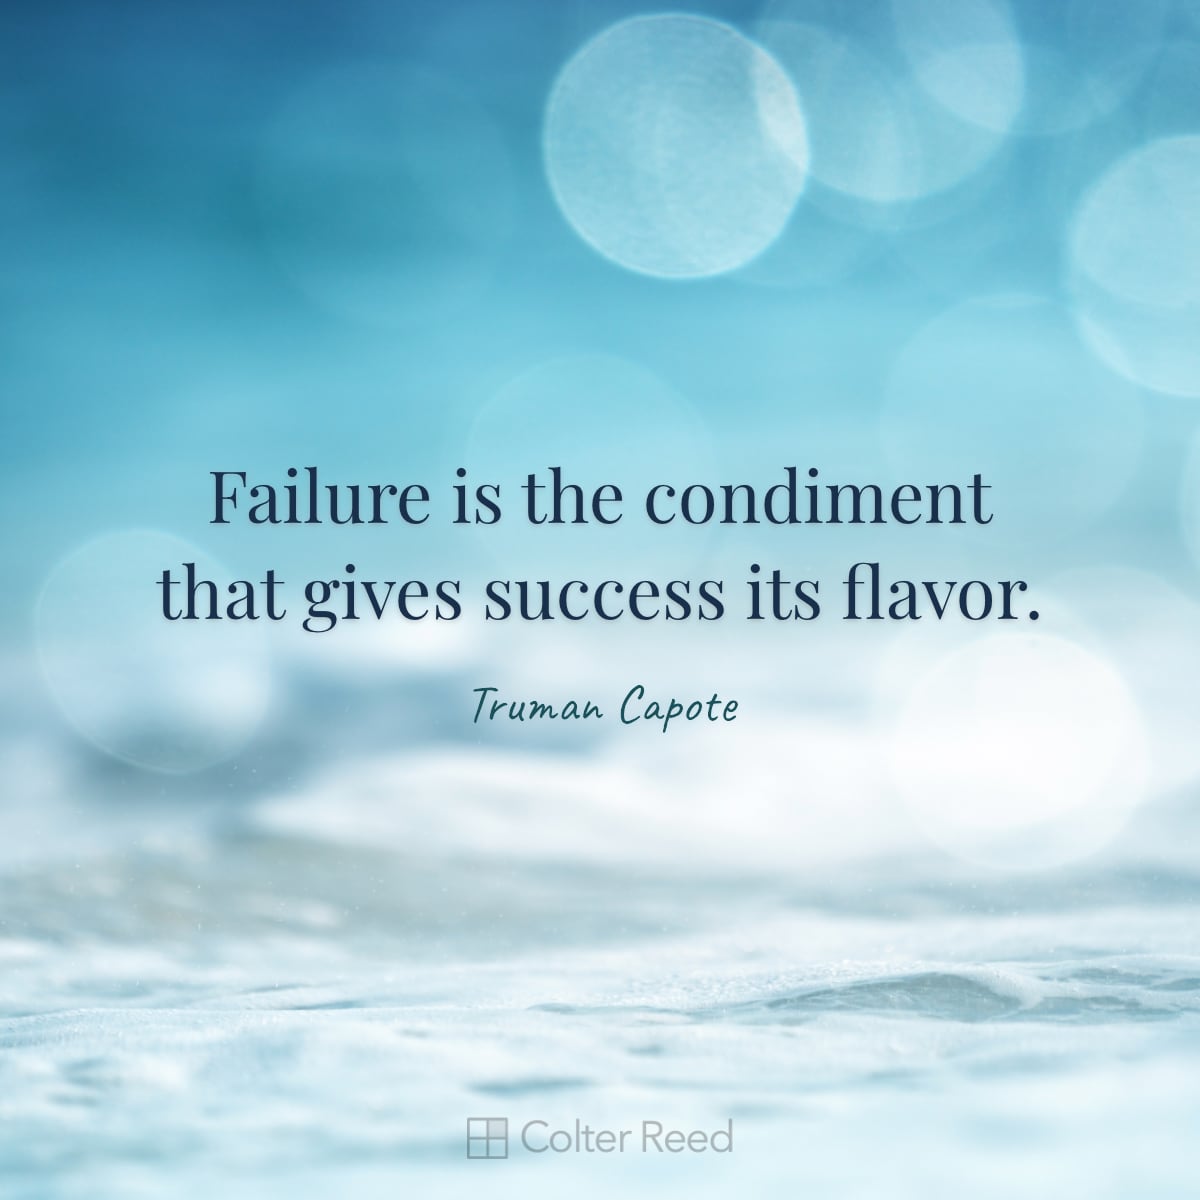 Failure is the condiment that gives success its flavor. —Truman Capote